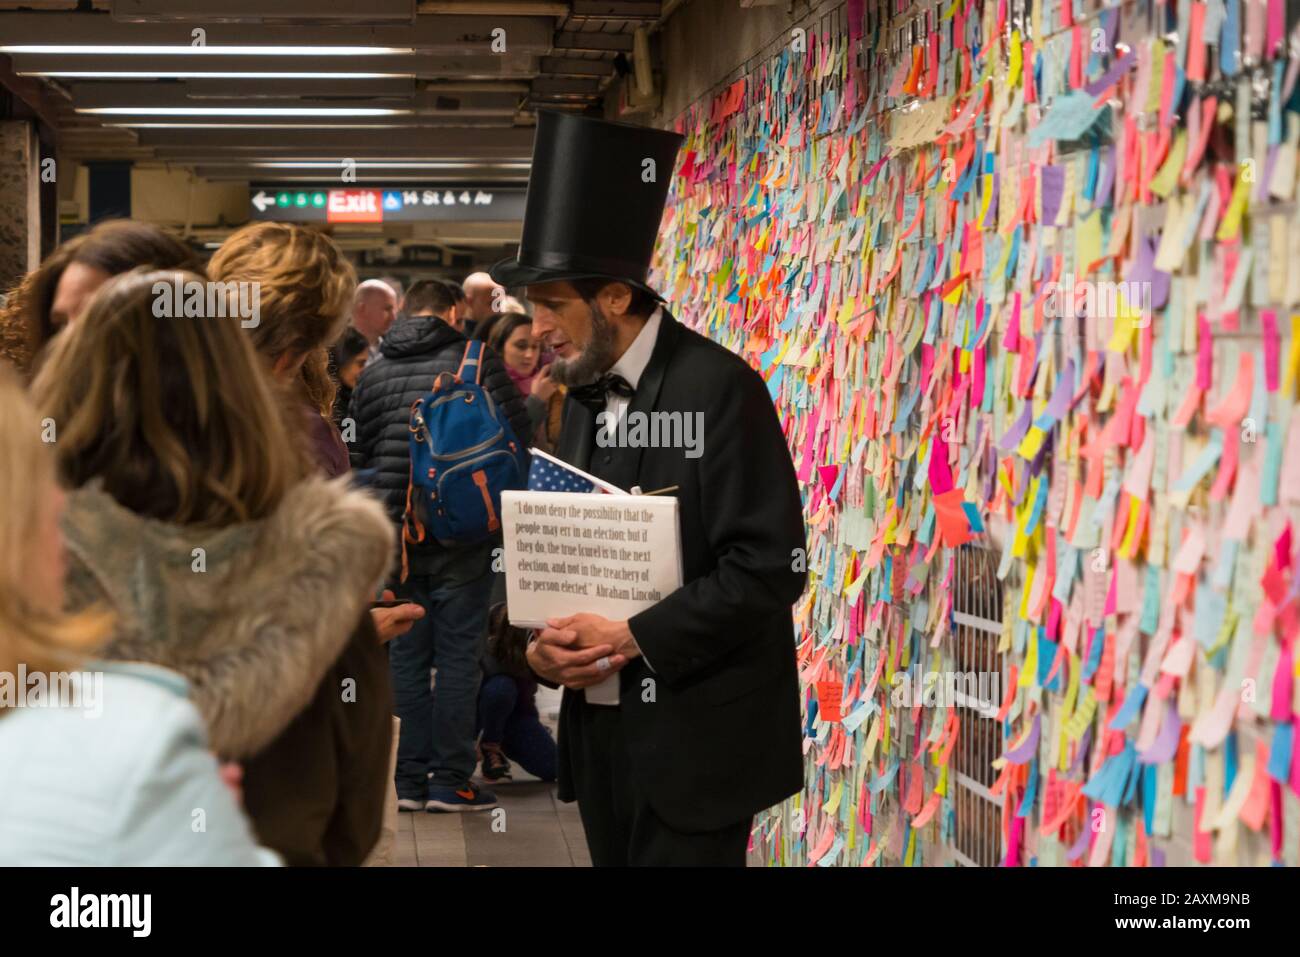 New Yorkers cover the subway station wall in emotional election sticky notes after the presidential election 2016 at Union Square Station New York USA. Stock Photo